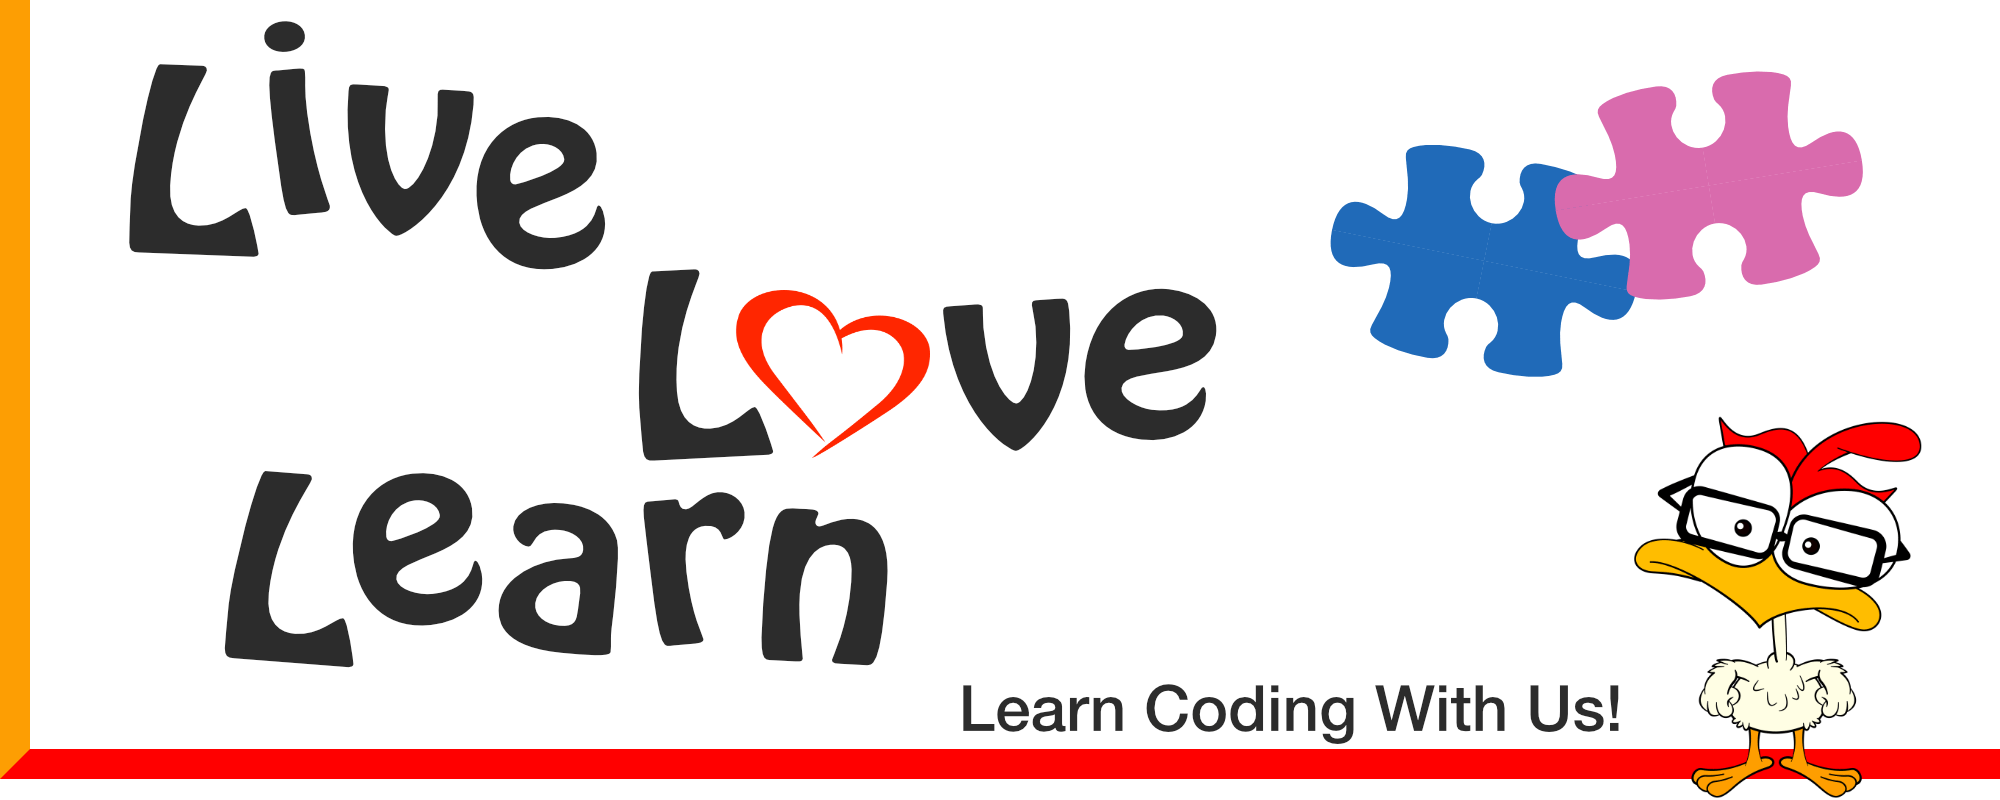 Learn Coding With Us!